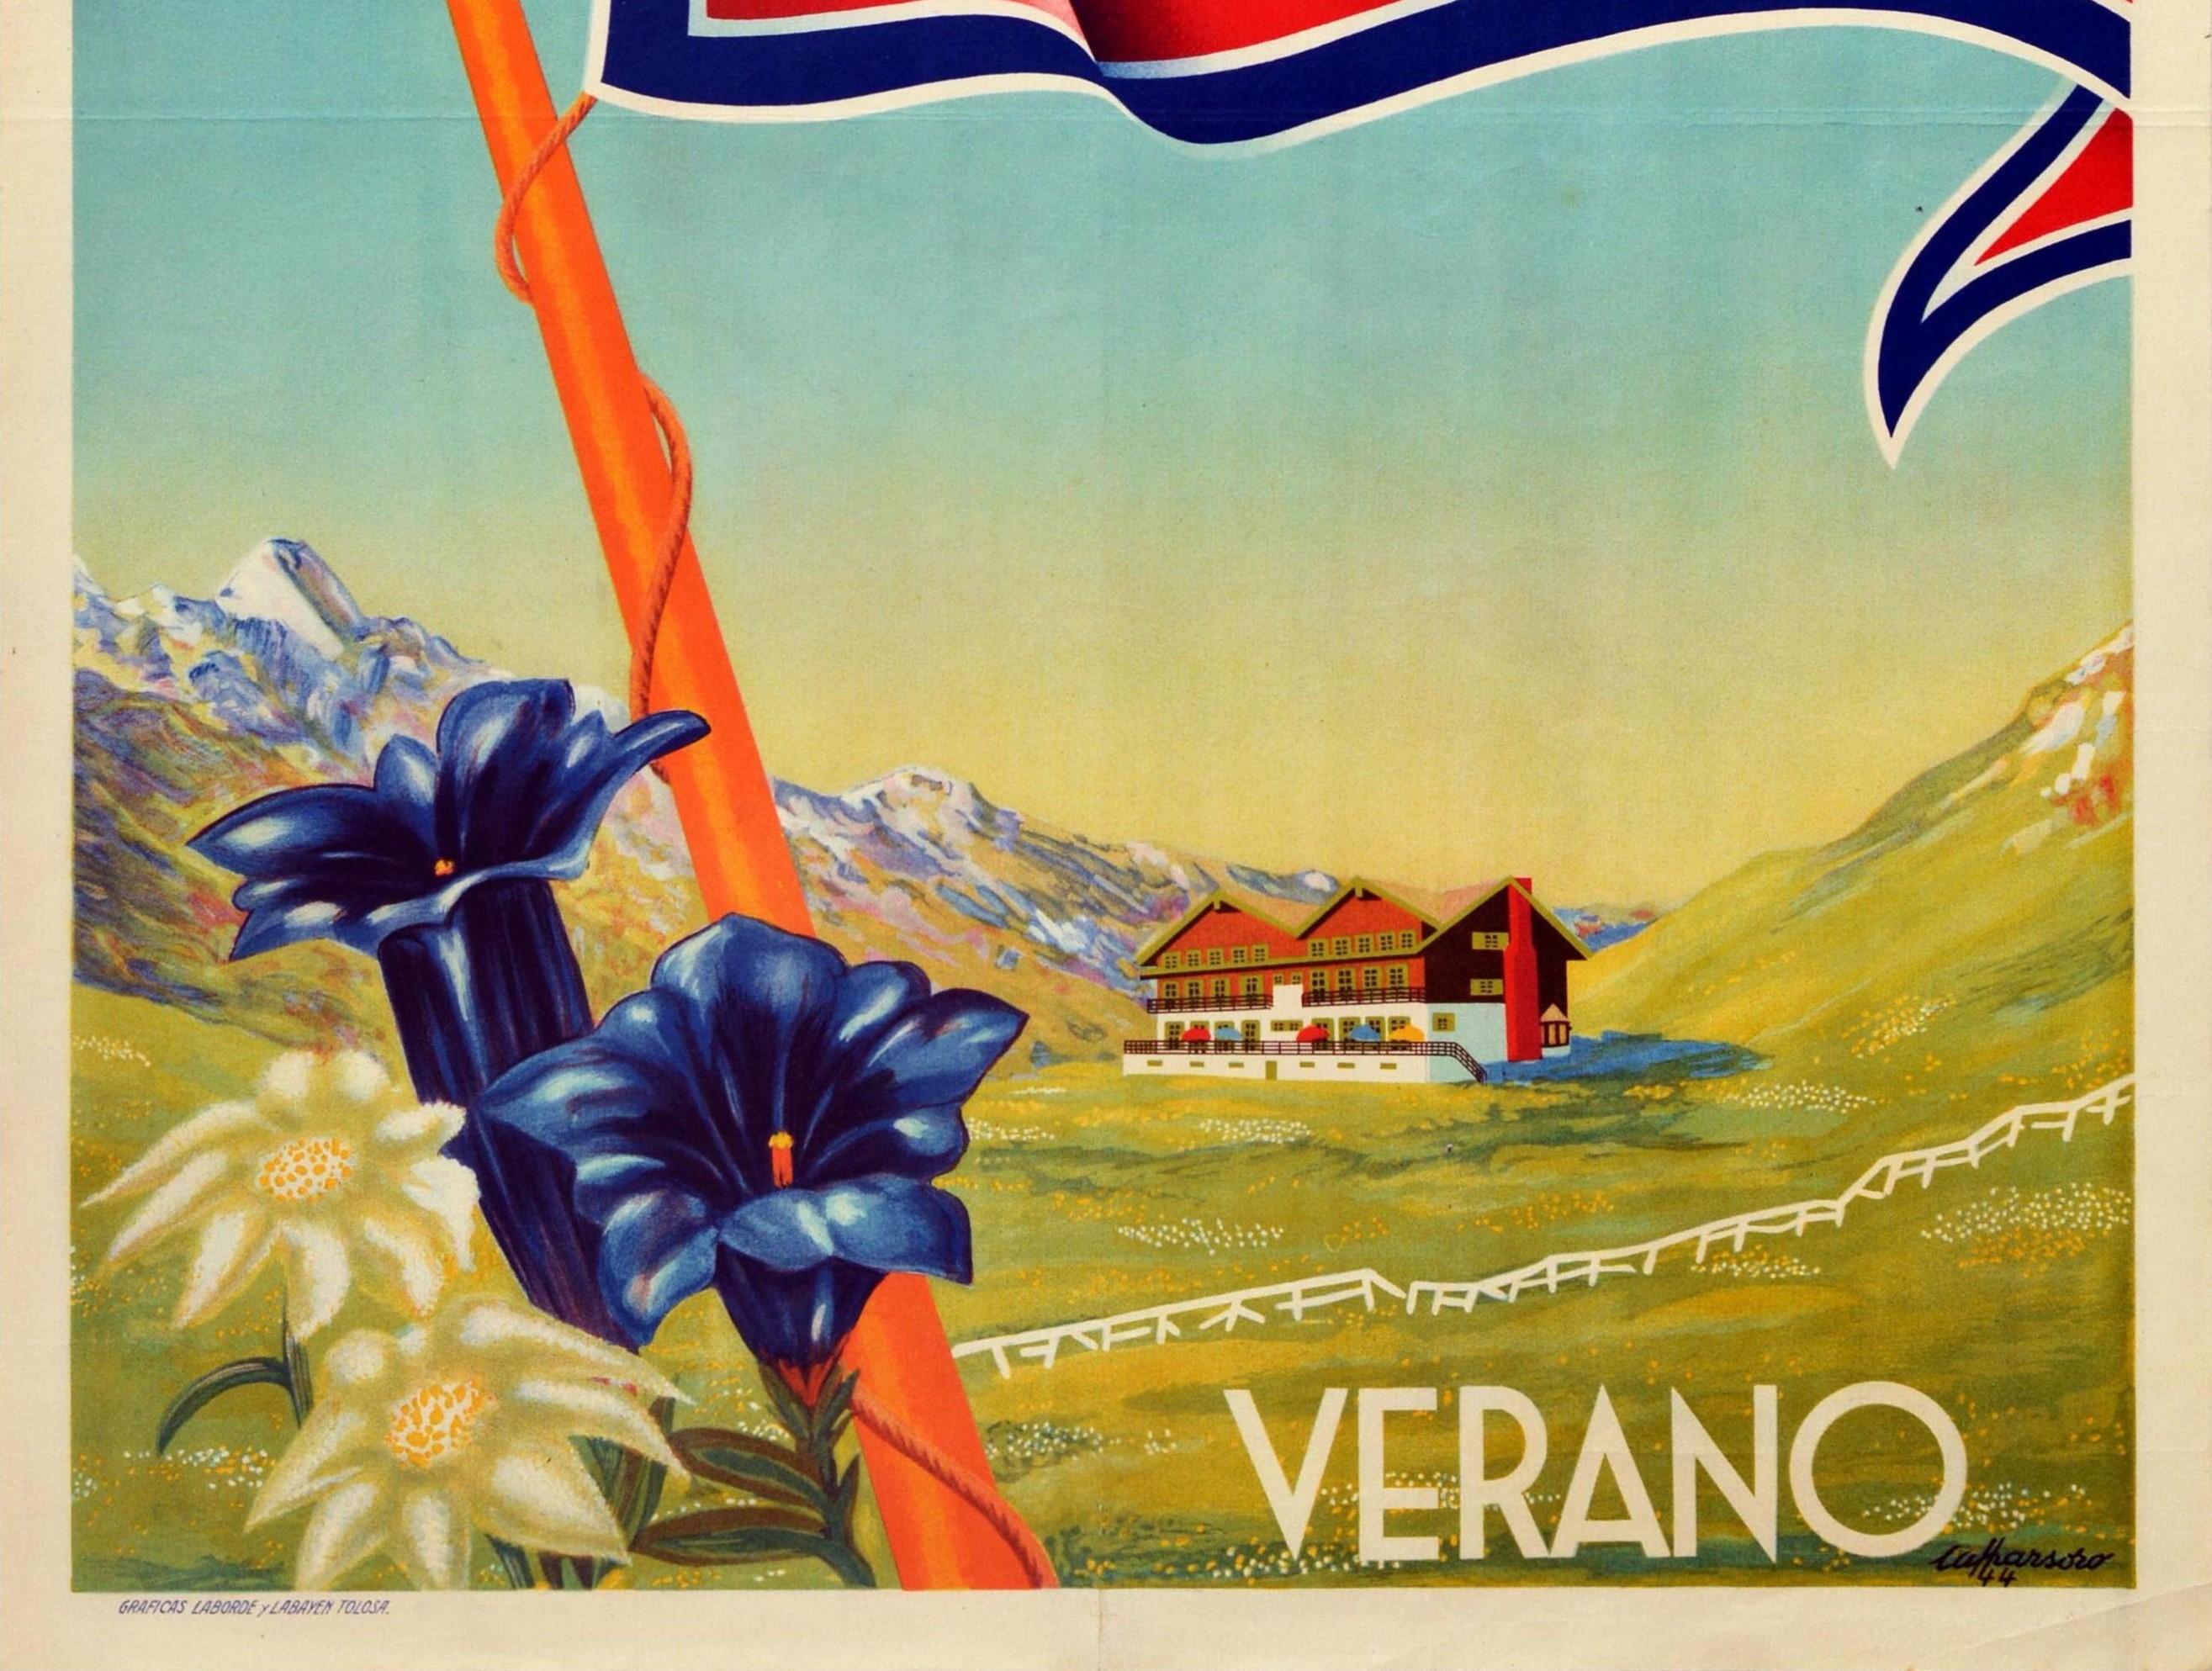 Spanish Original Vintage Travel Poster Hotel Candanchu Canfranc Verano Summer Mountains For Sale